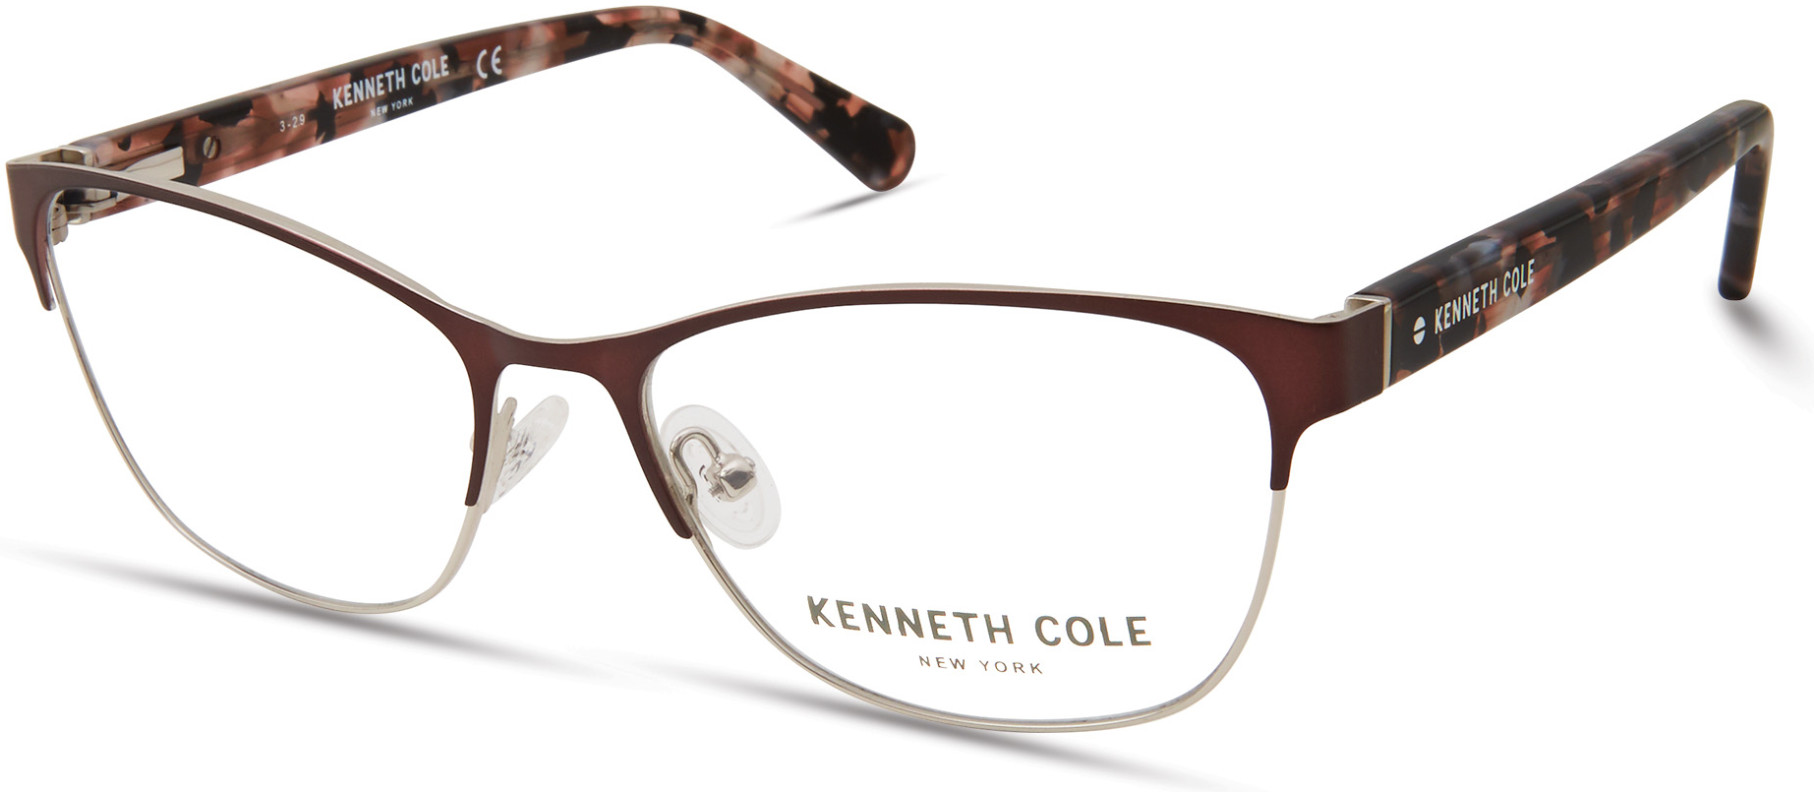 KENNETH COLE NY 0311 045